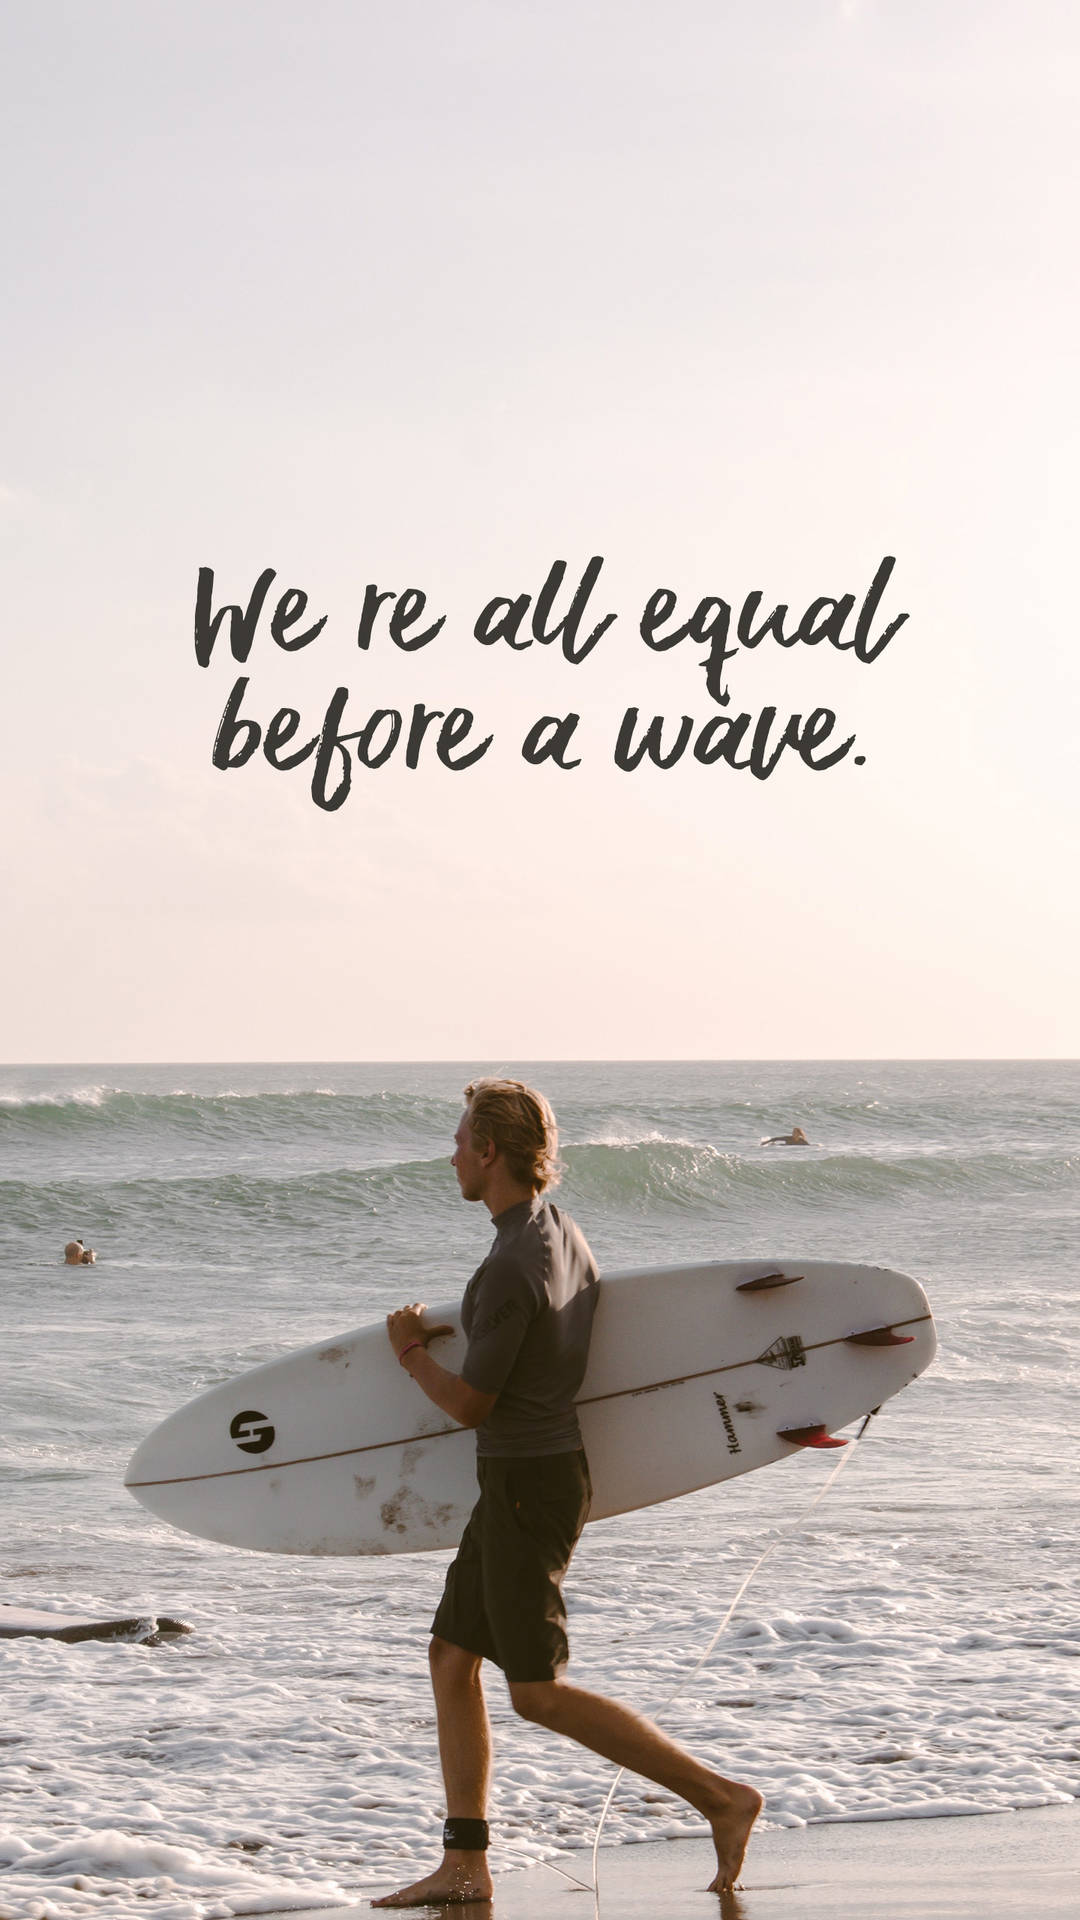 Surfing All Equal Quote